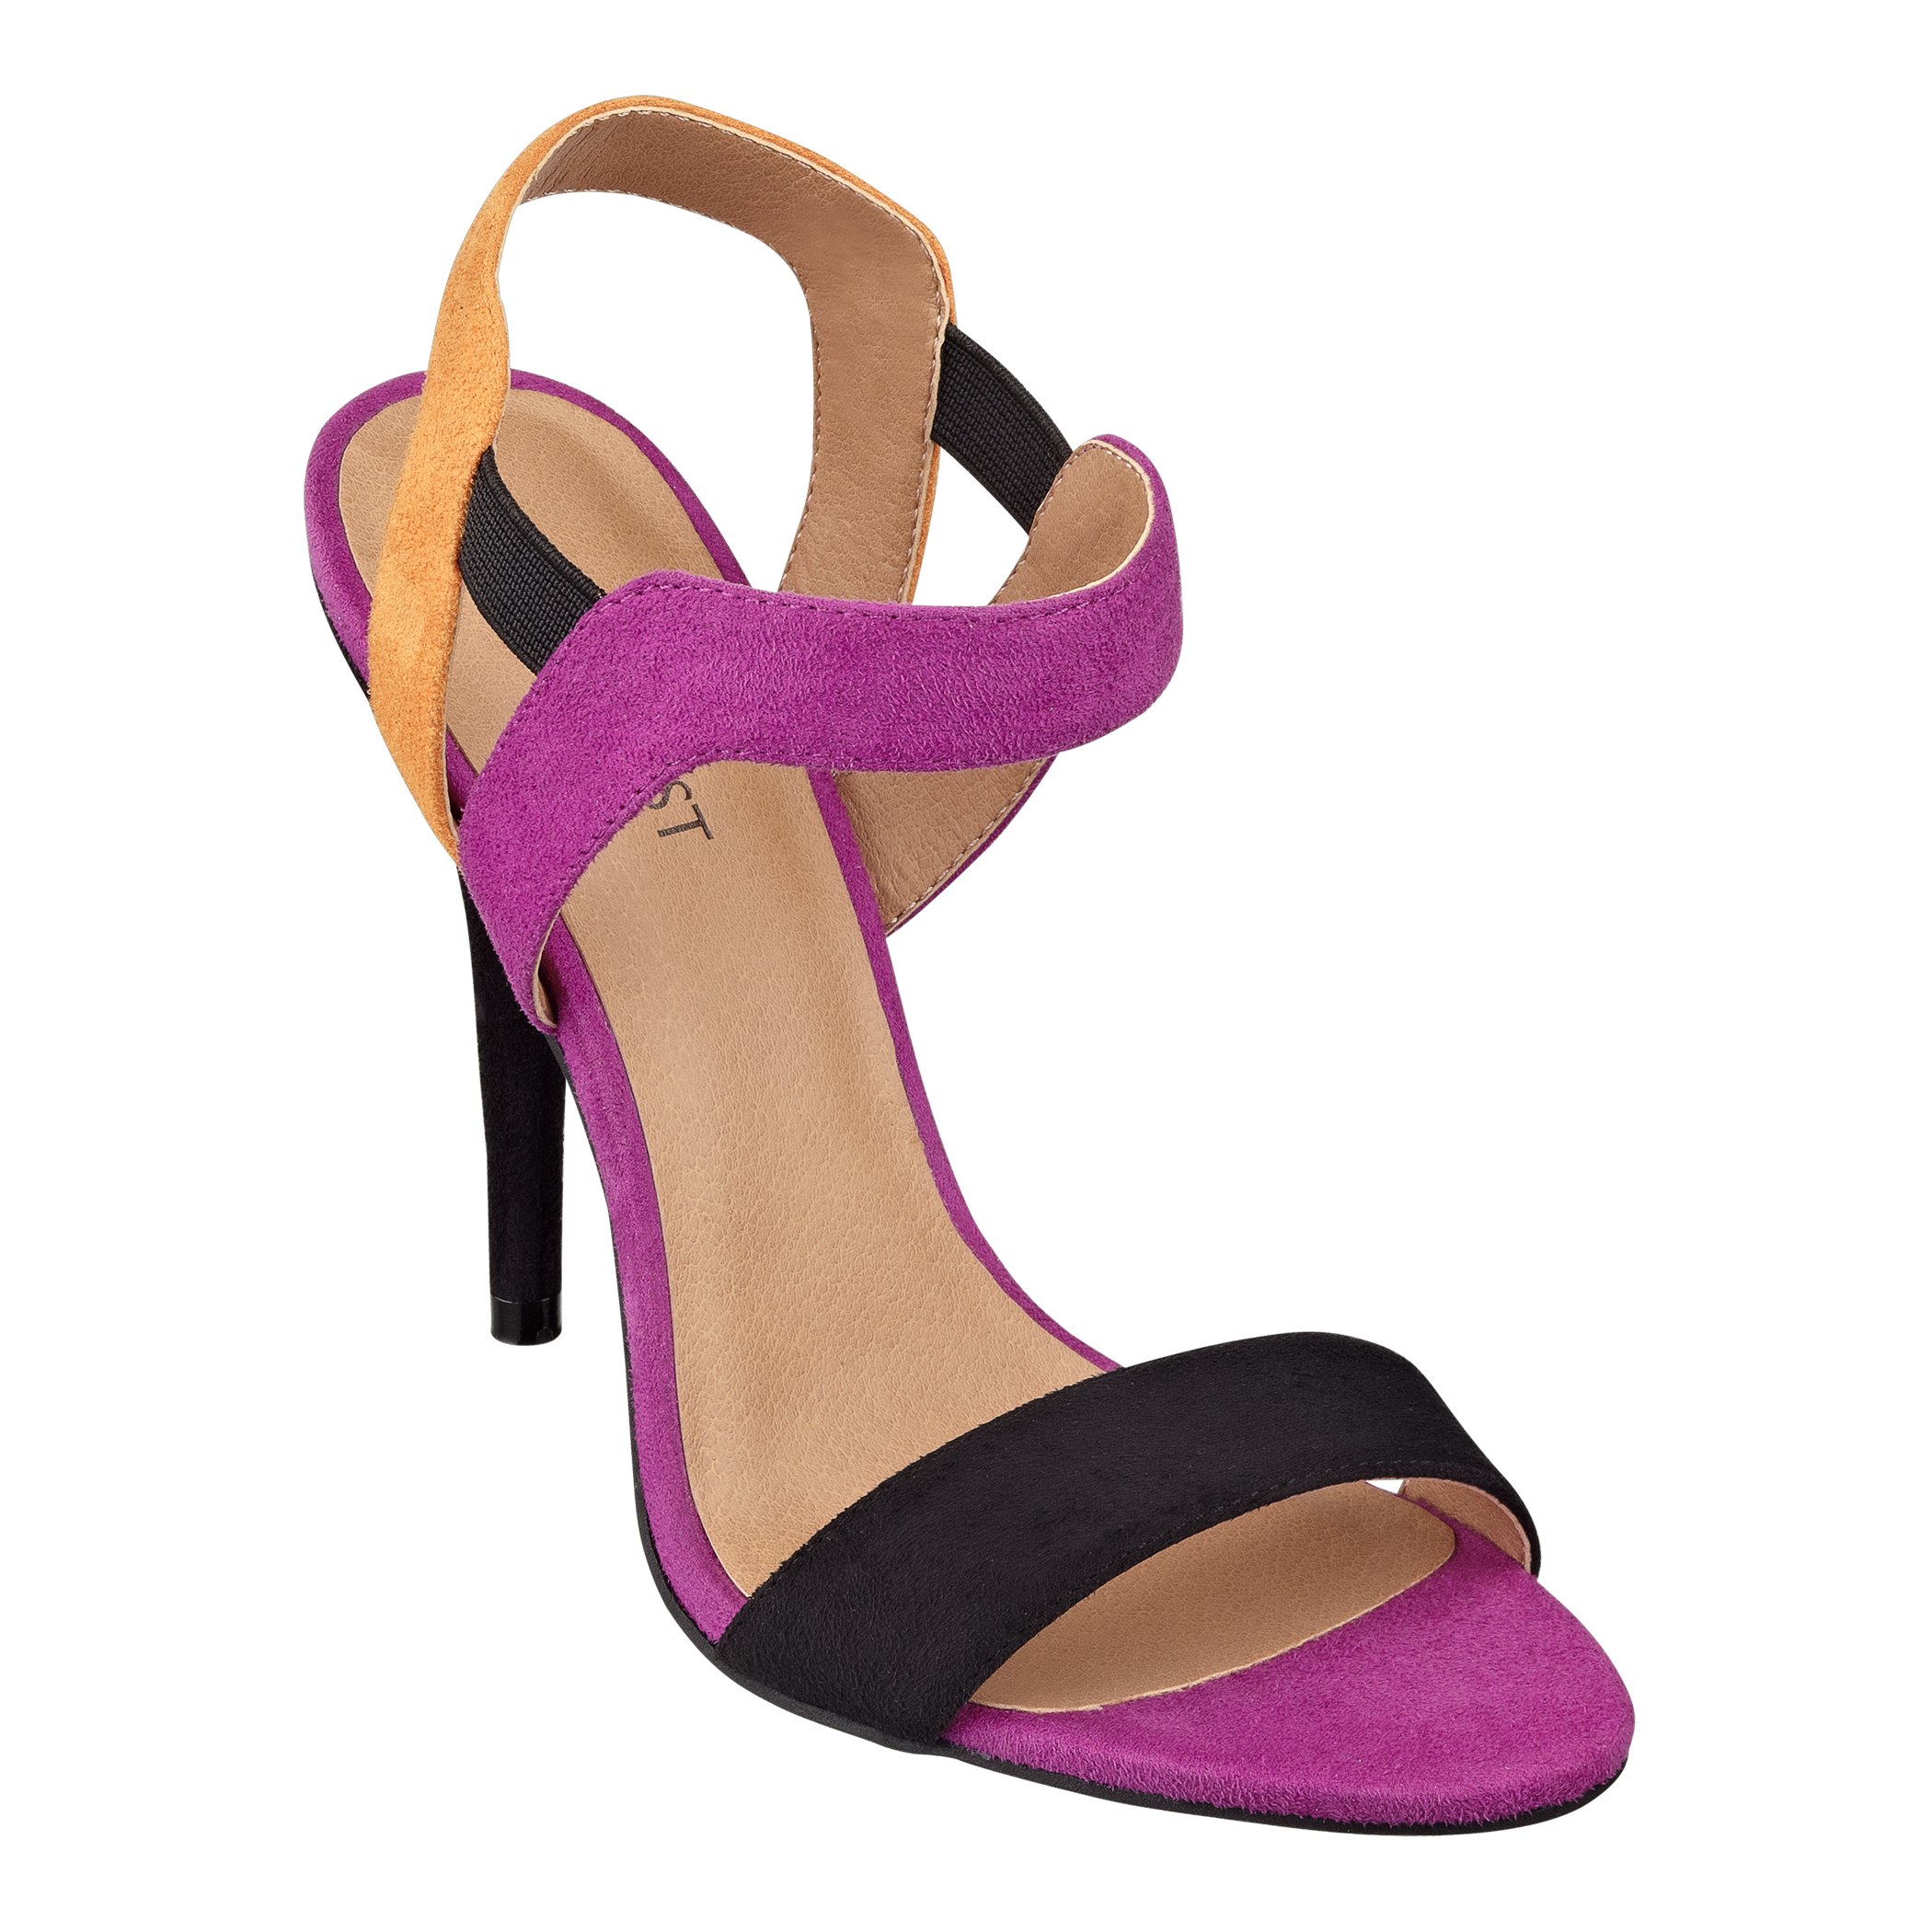 Latest Fashion of Stiletto & Heels Collection for women by Nine West (27)